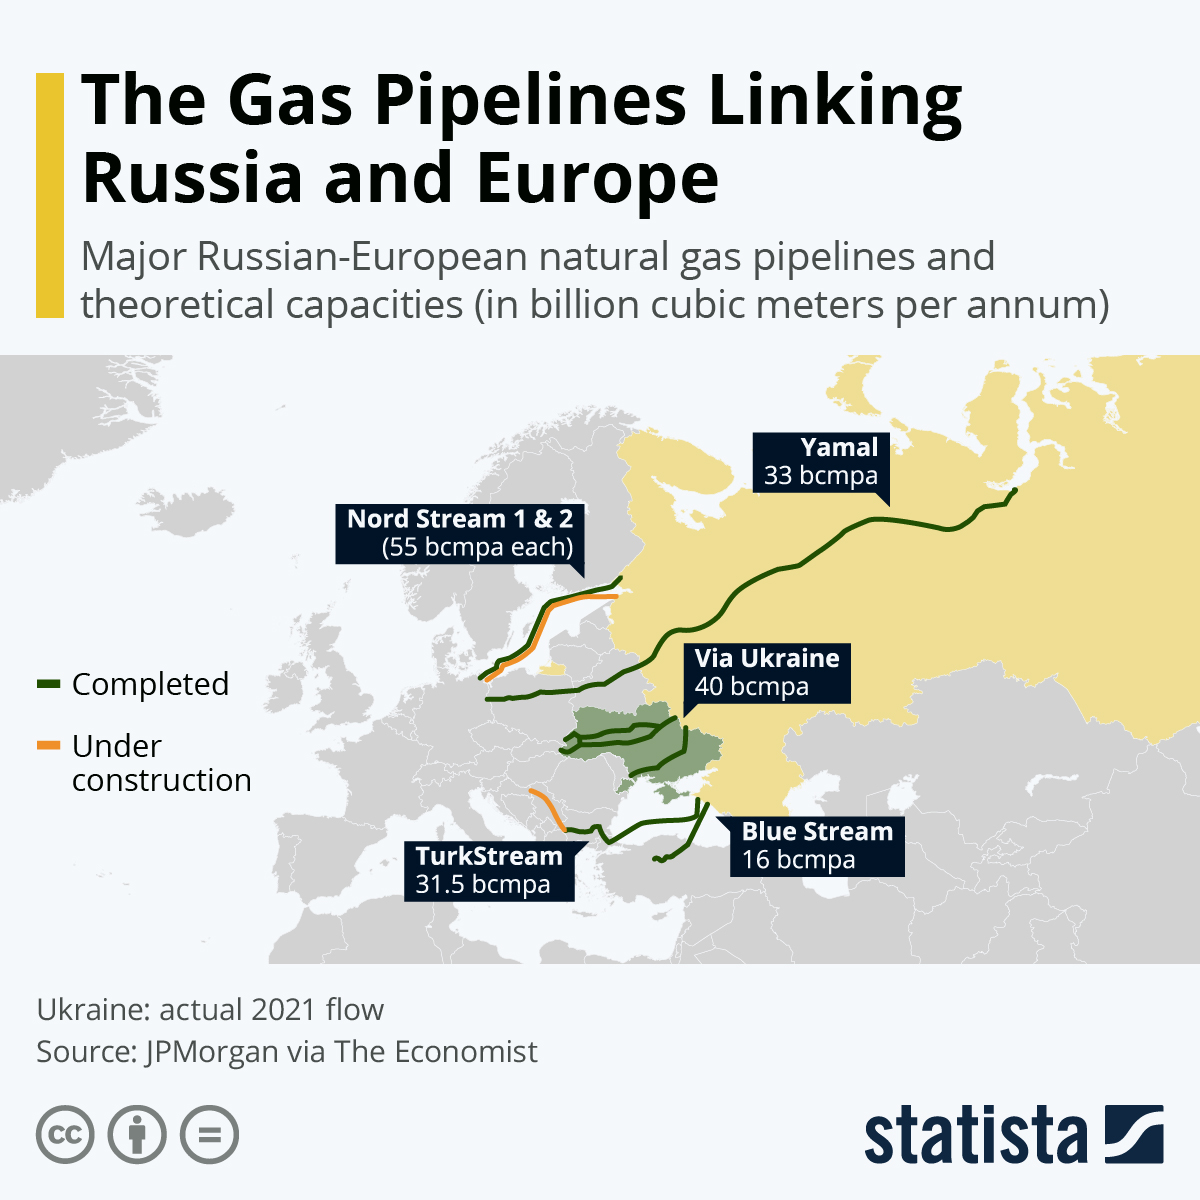 The Gas Pipelines Linking Russia and Europe